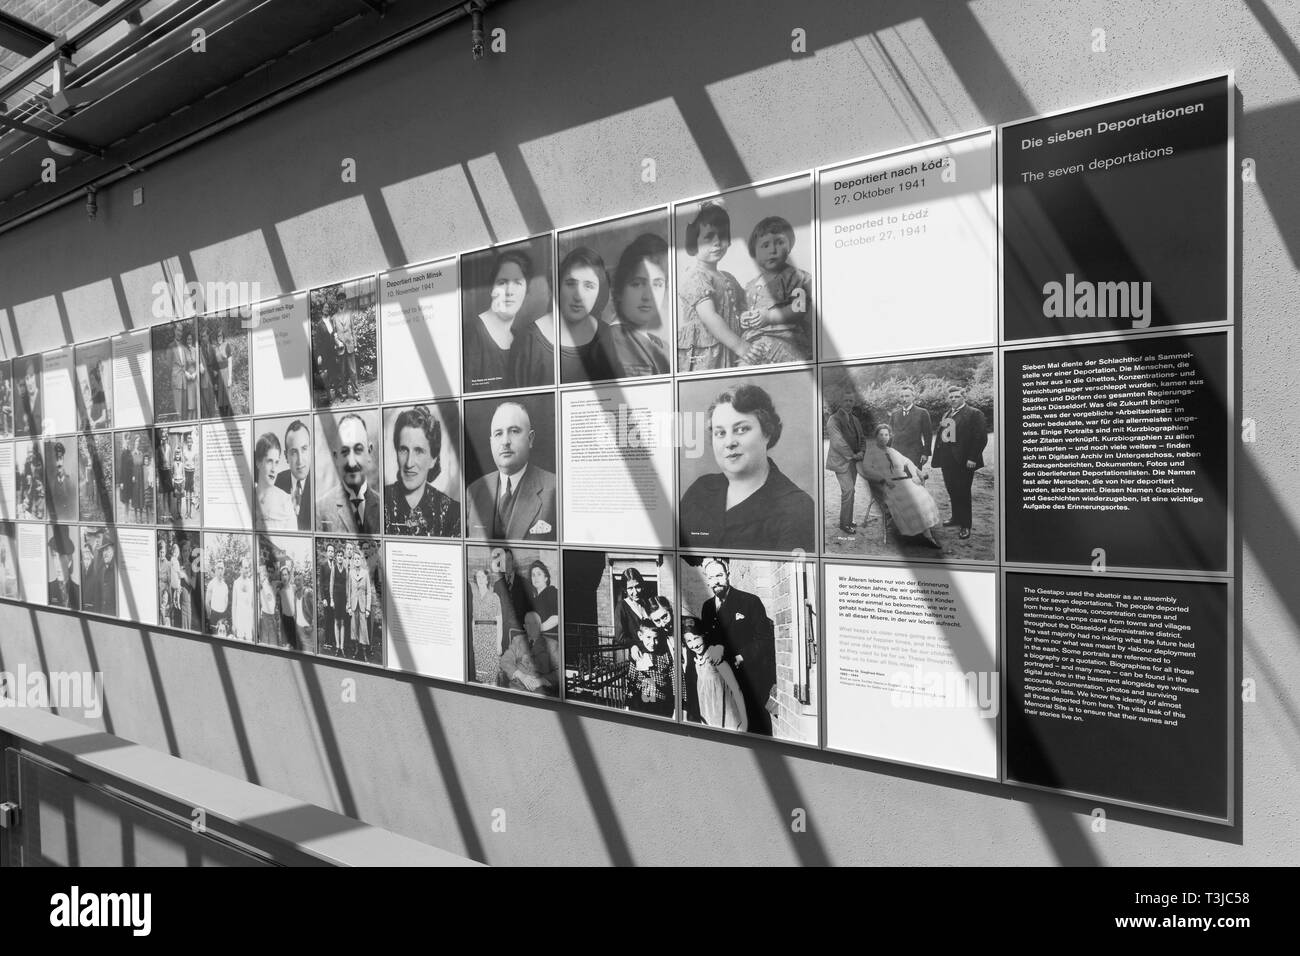 Picture wall with portraits of Jewish inhabitants, 1941 deported to Lodz, Place of Remembrance Alter Schlachthof, Dusseldorf-Derendorf, North Stock Photo